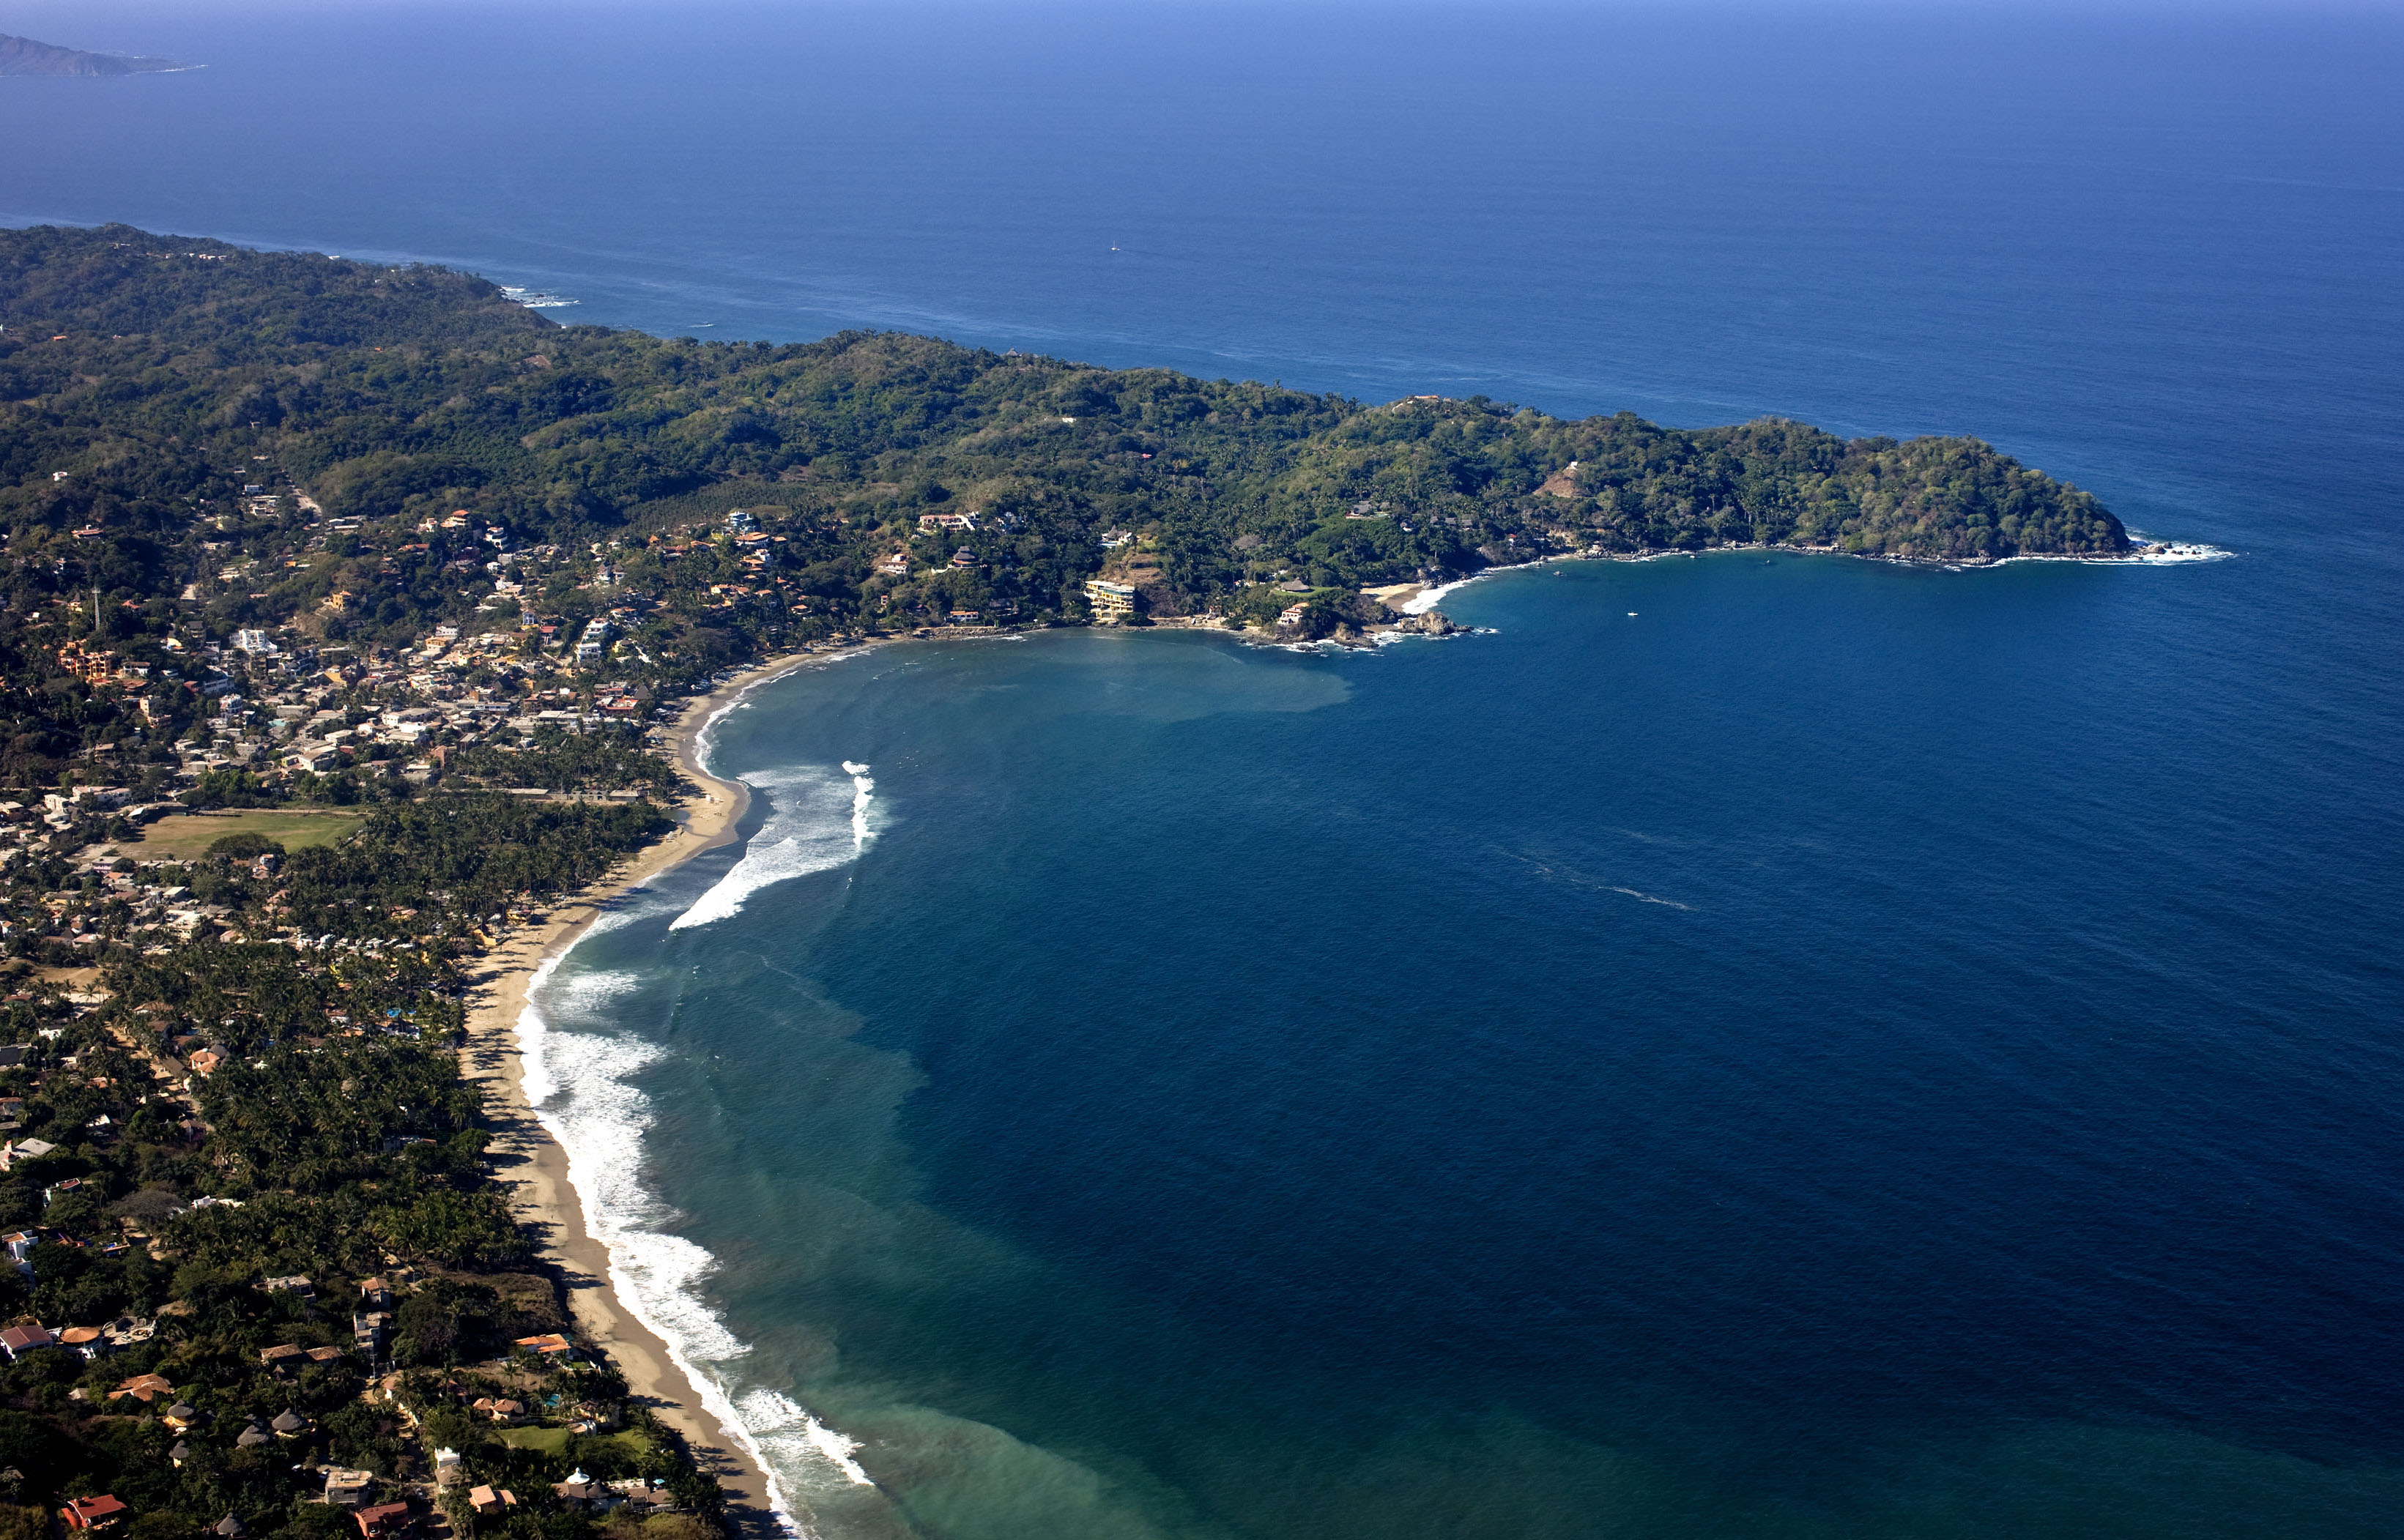 Top Competitors to Compete at 2nd Annual Punta Sayulita Longboard